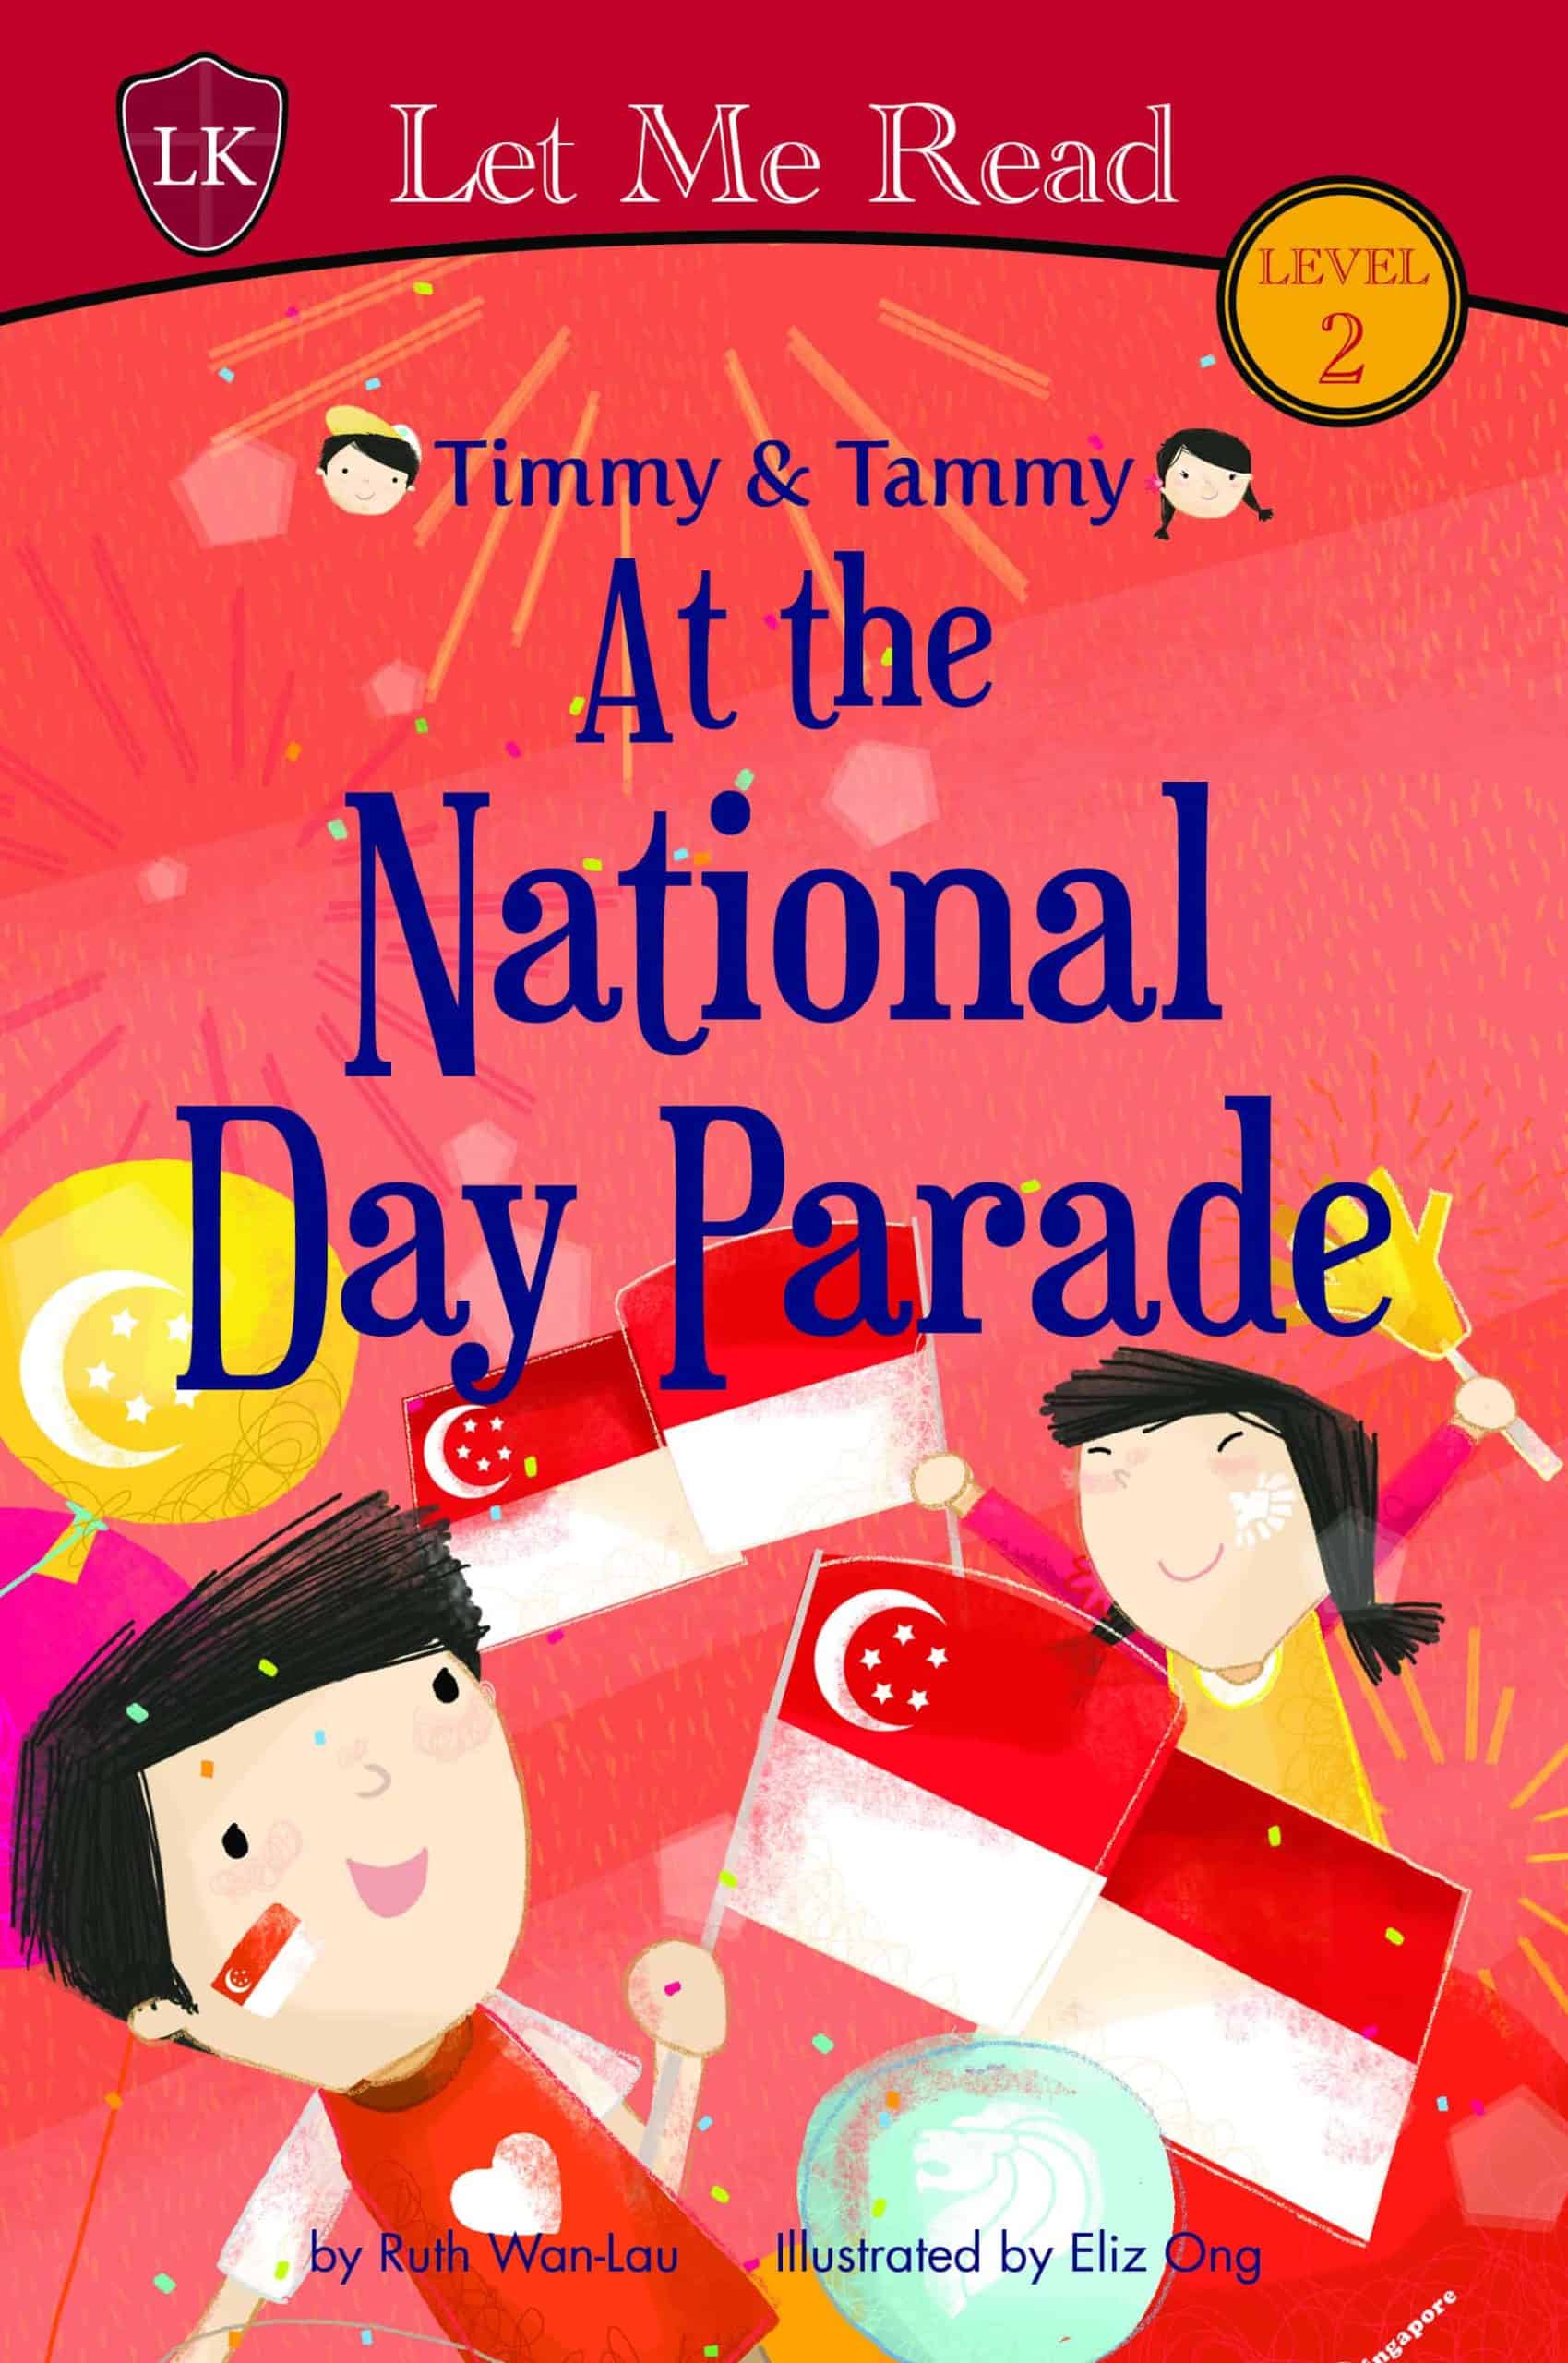 Timmy & Tammy (Level 2): At the National Day Parade